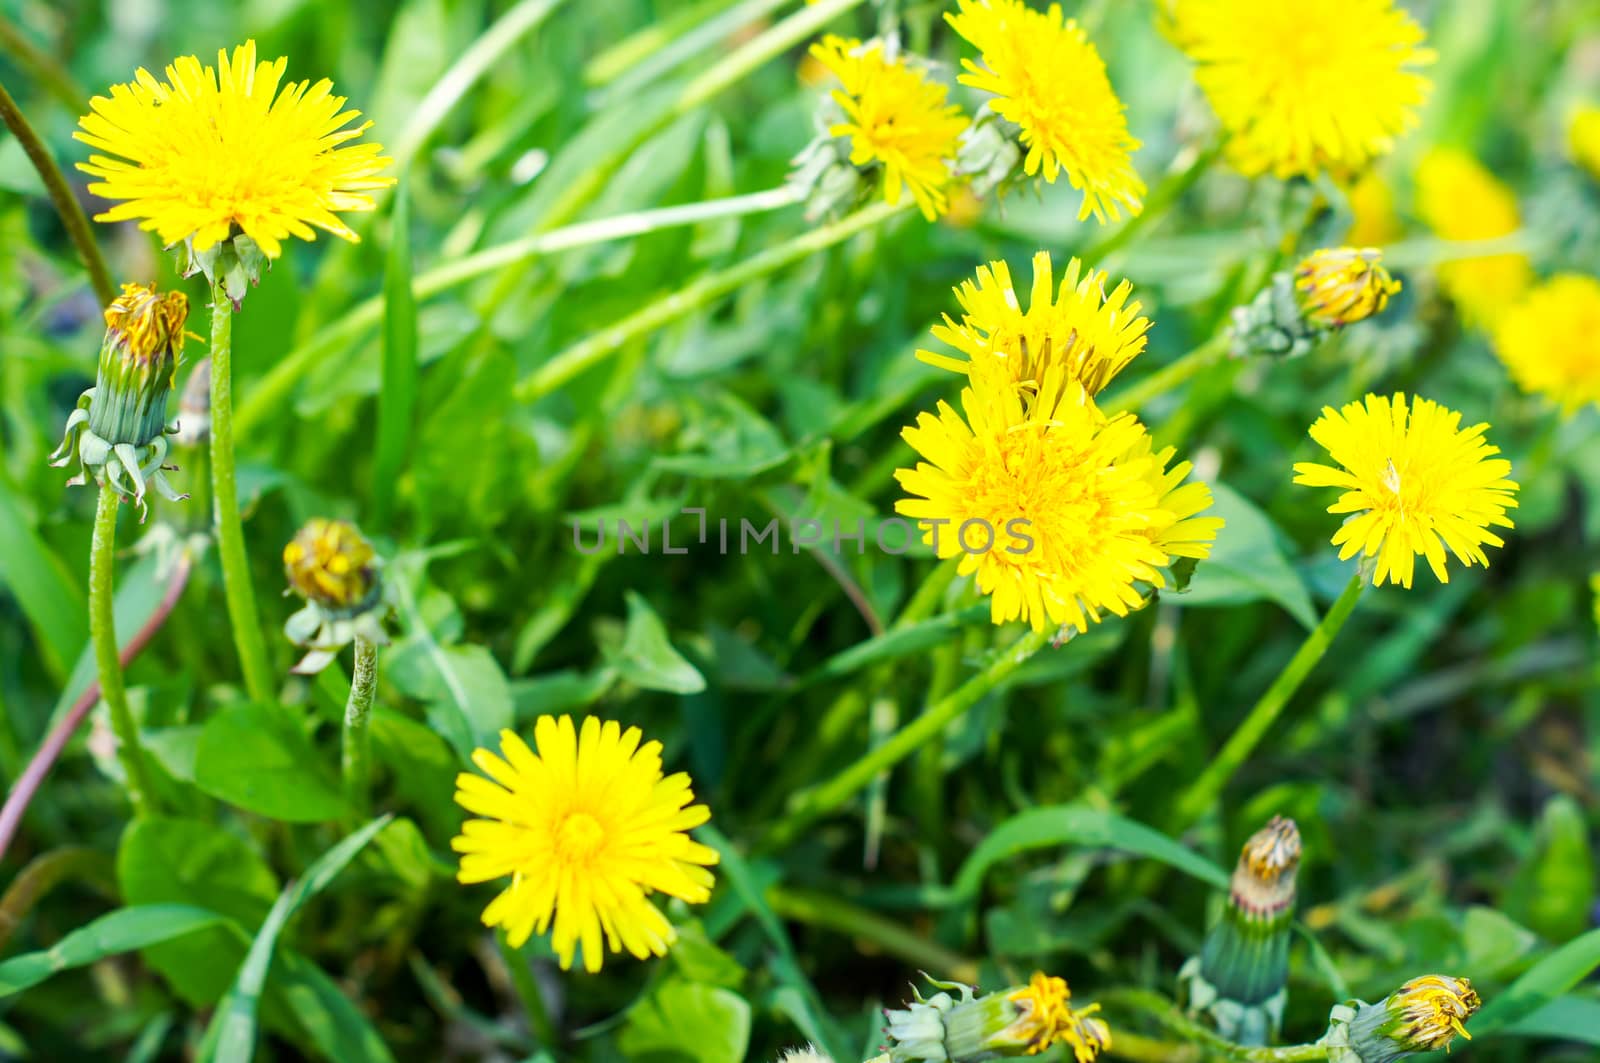 beautiful dandelion flower on a bright, sunny day in the outdoors by Adamchuk